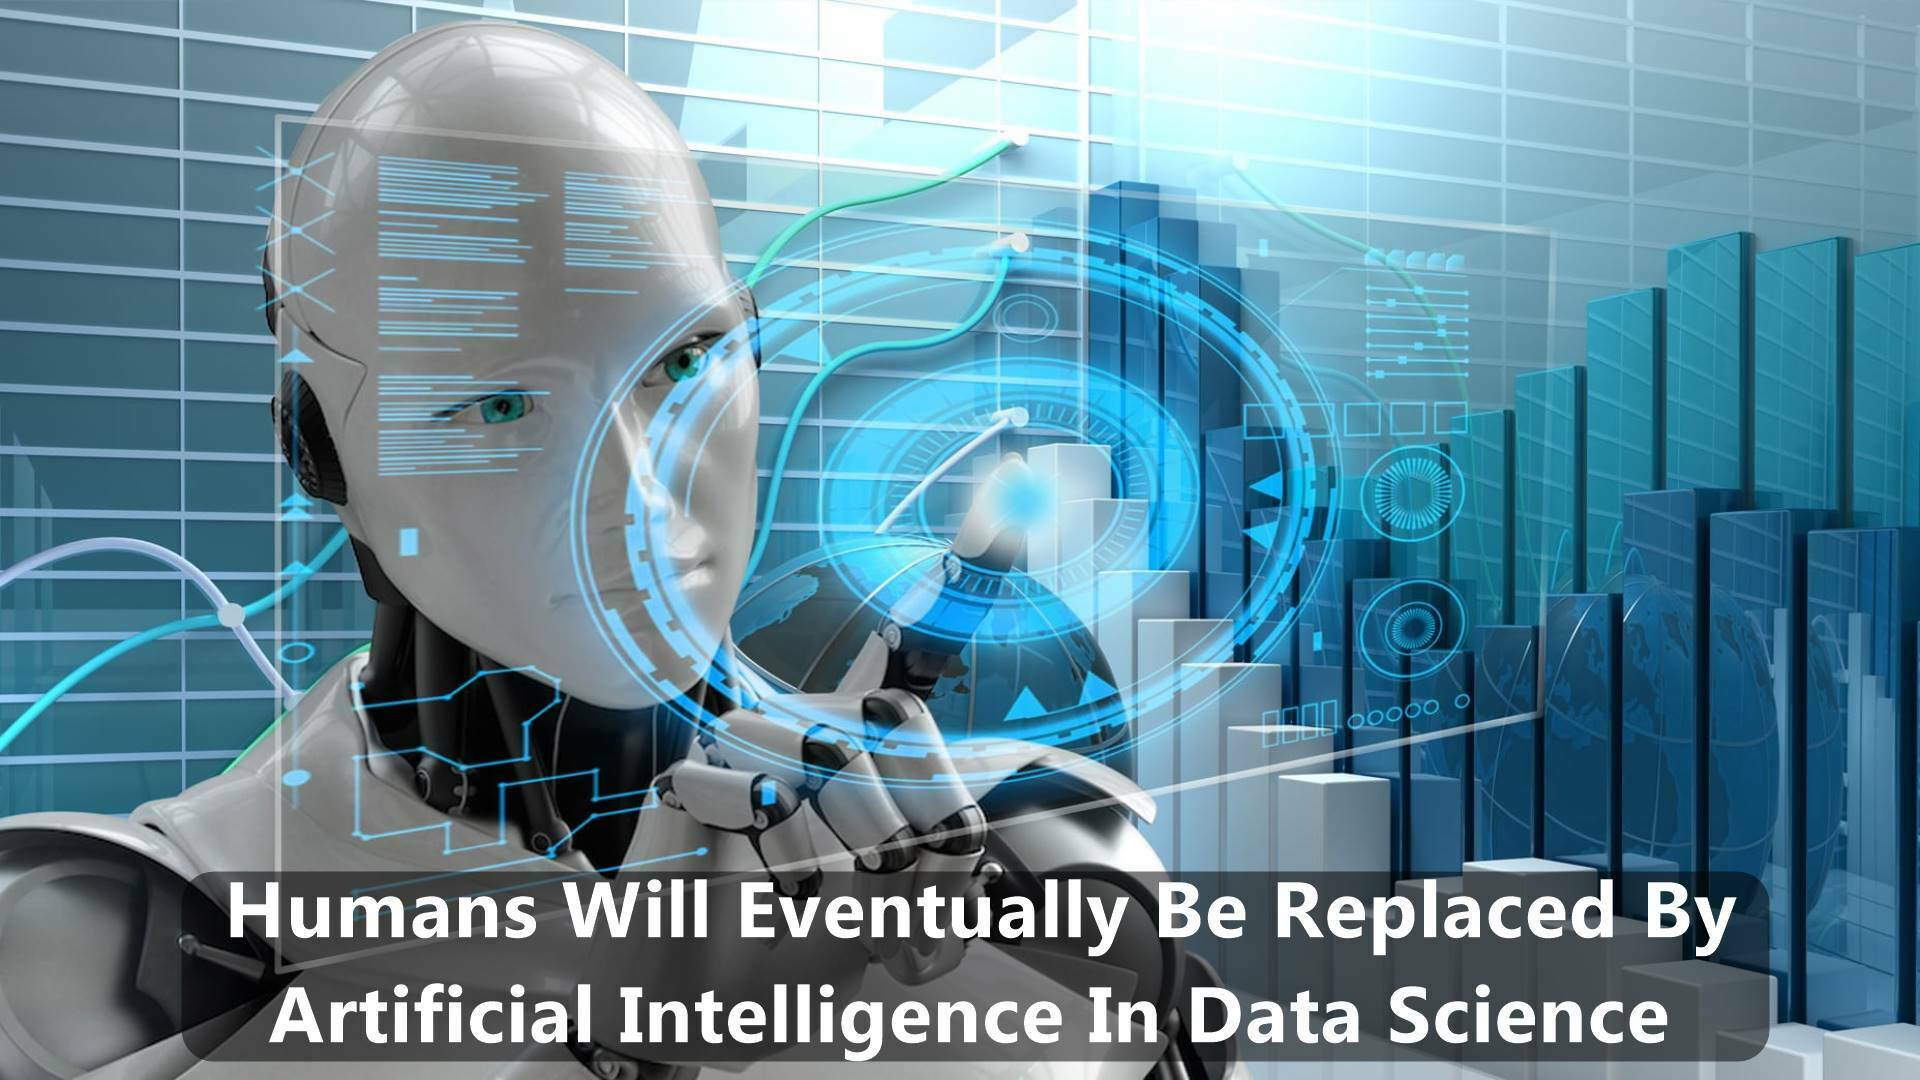 Humans Will Eventually Be Replaced By Artificial Intelligence In Data Science